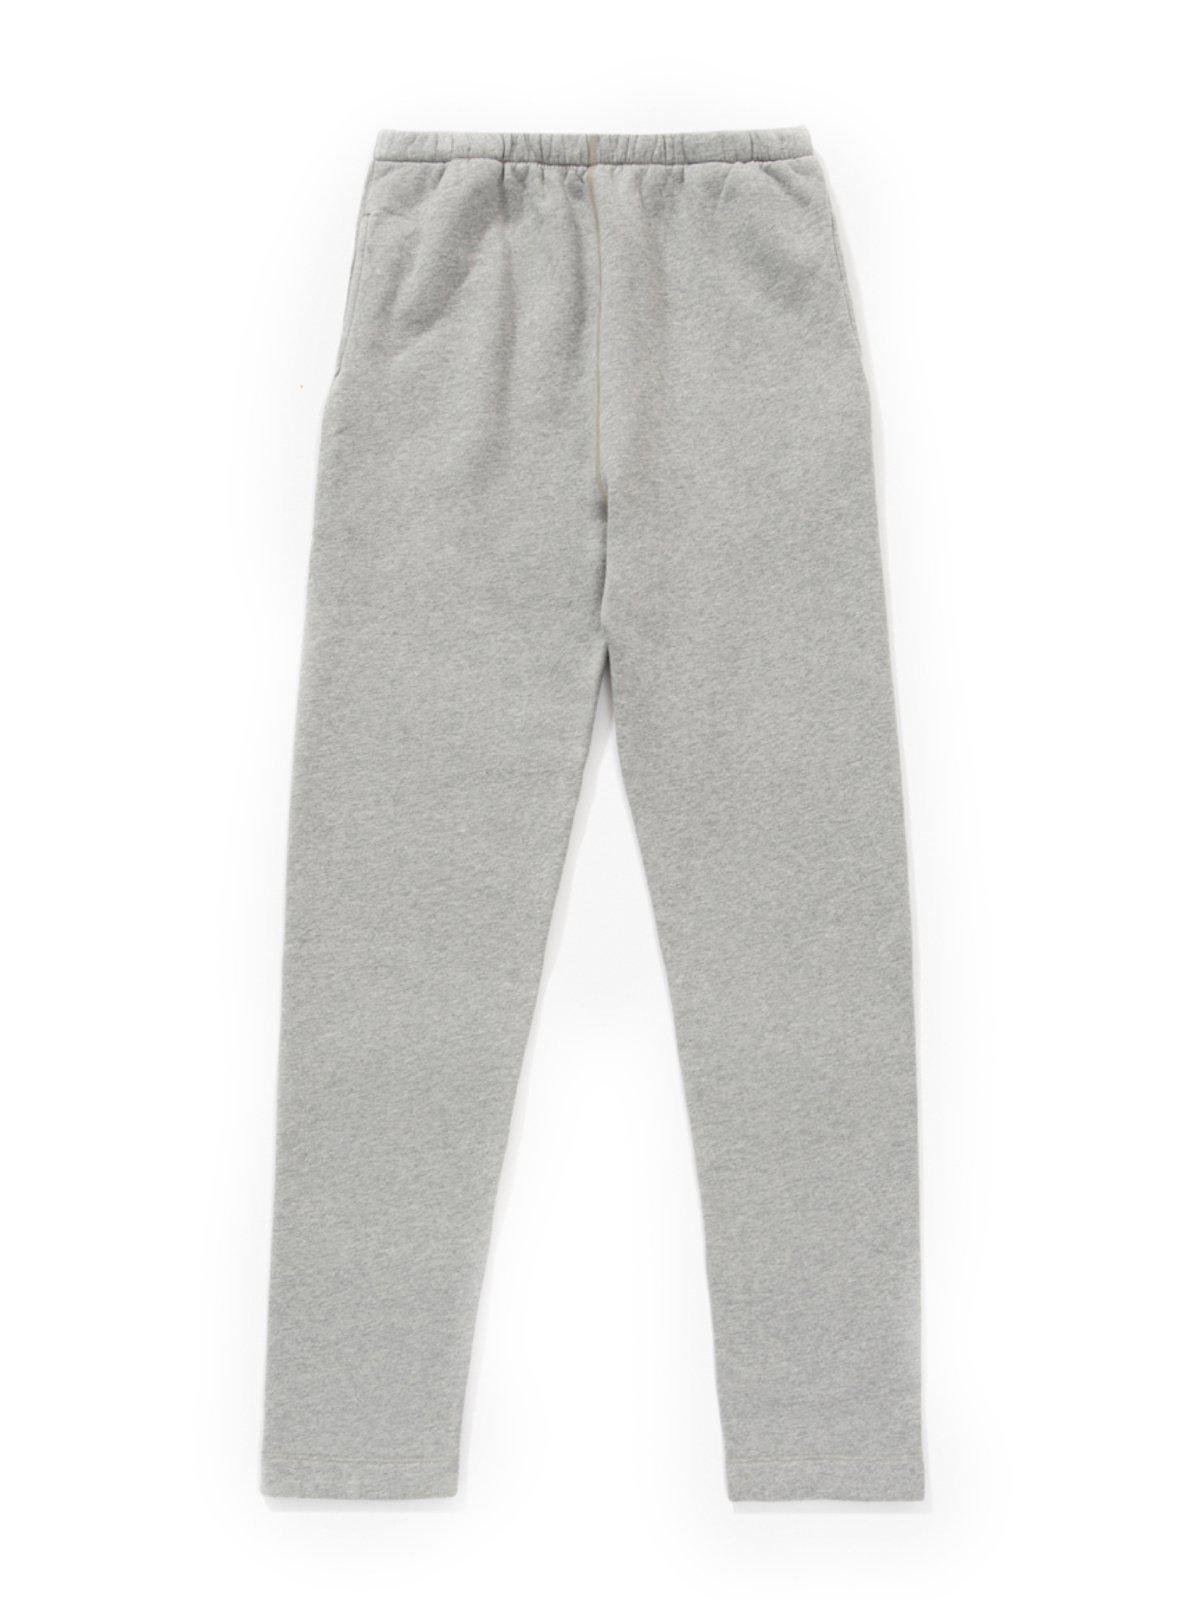 Lady White Co. Sweatpant Heather Grey - MORE by Morello Indonesia